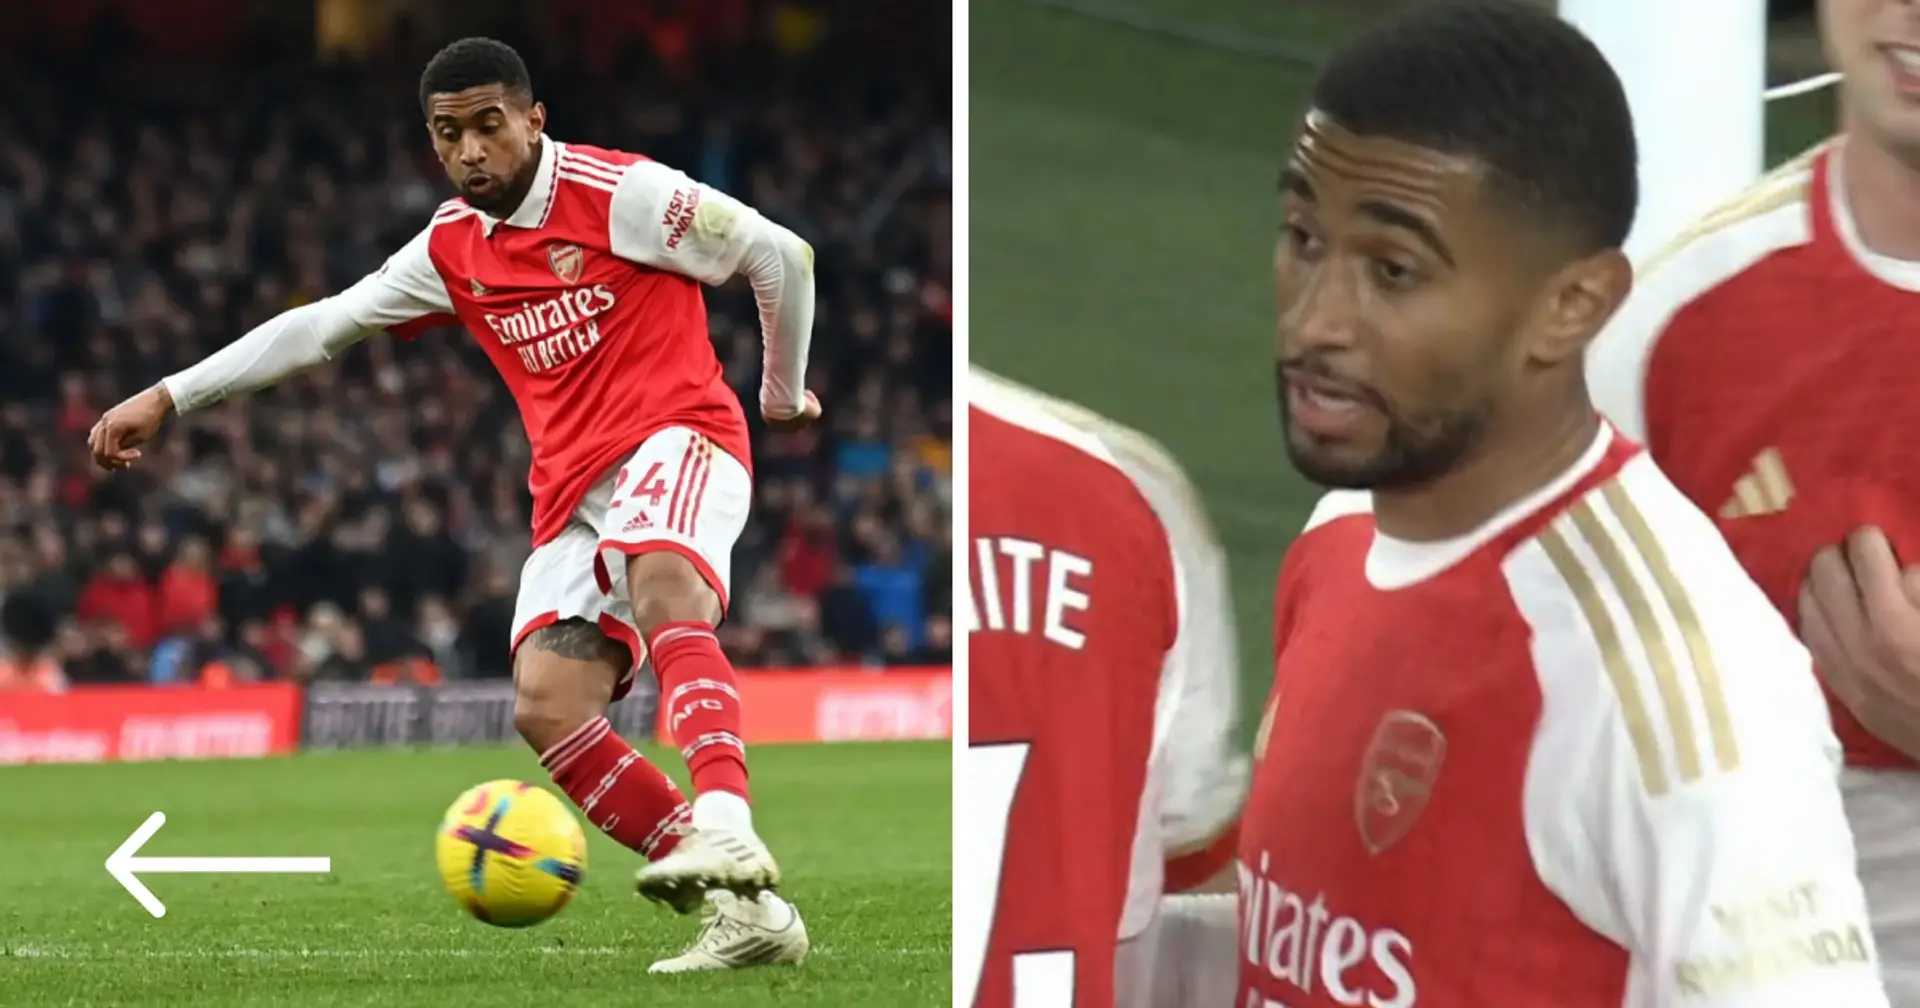 'Why?': Arsenal fans have one question for Reiss Nelson after his game